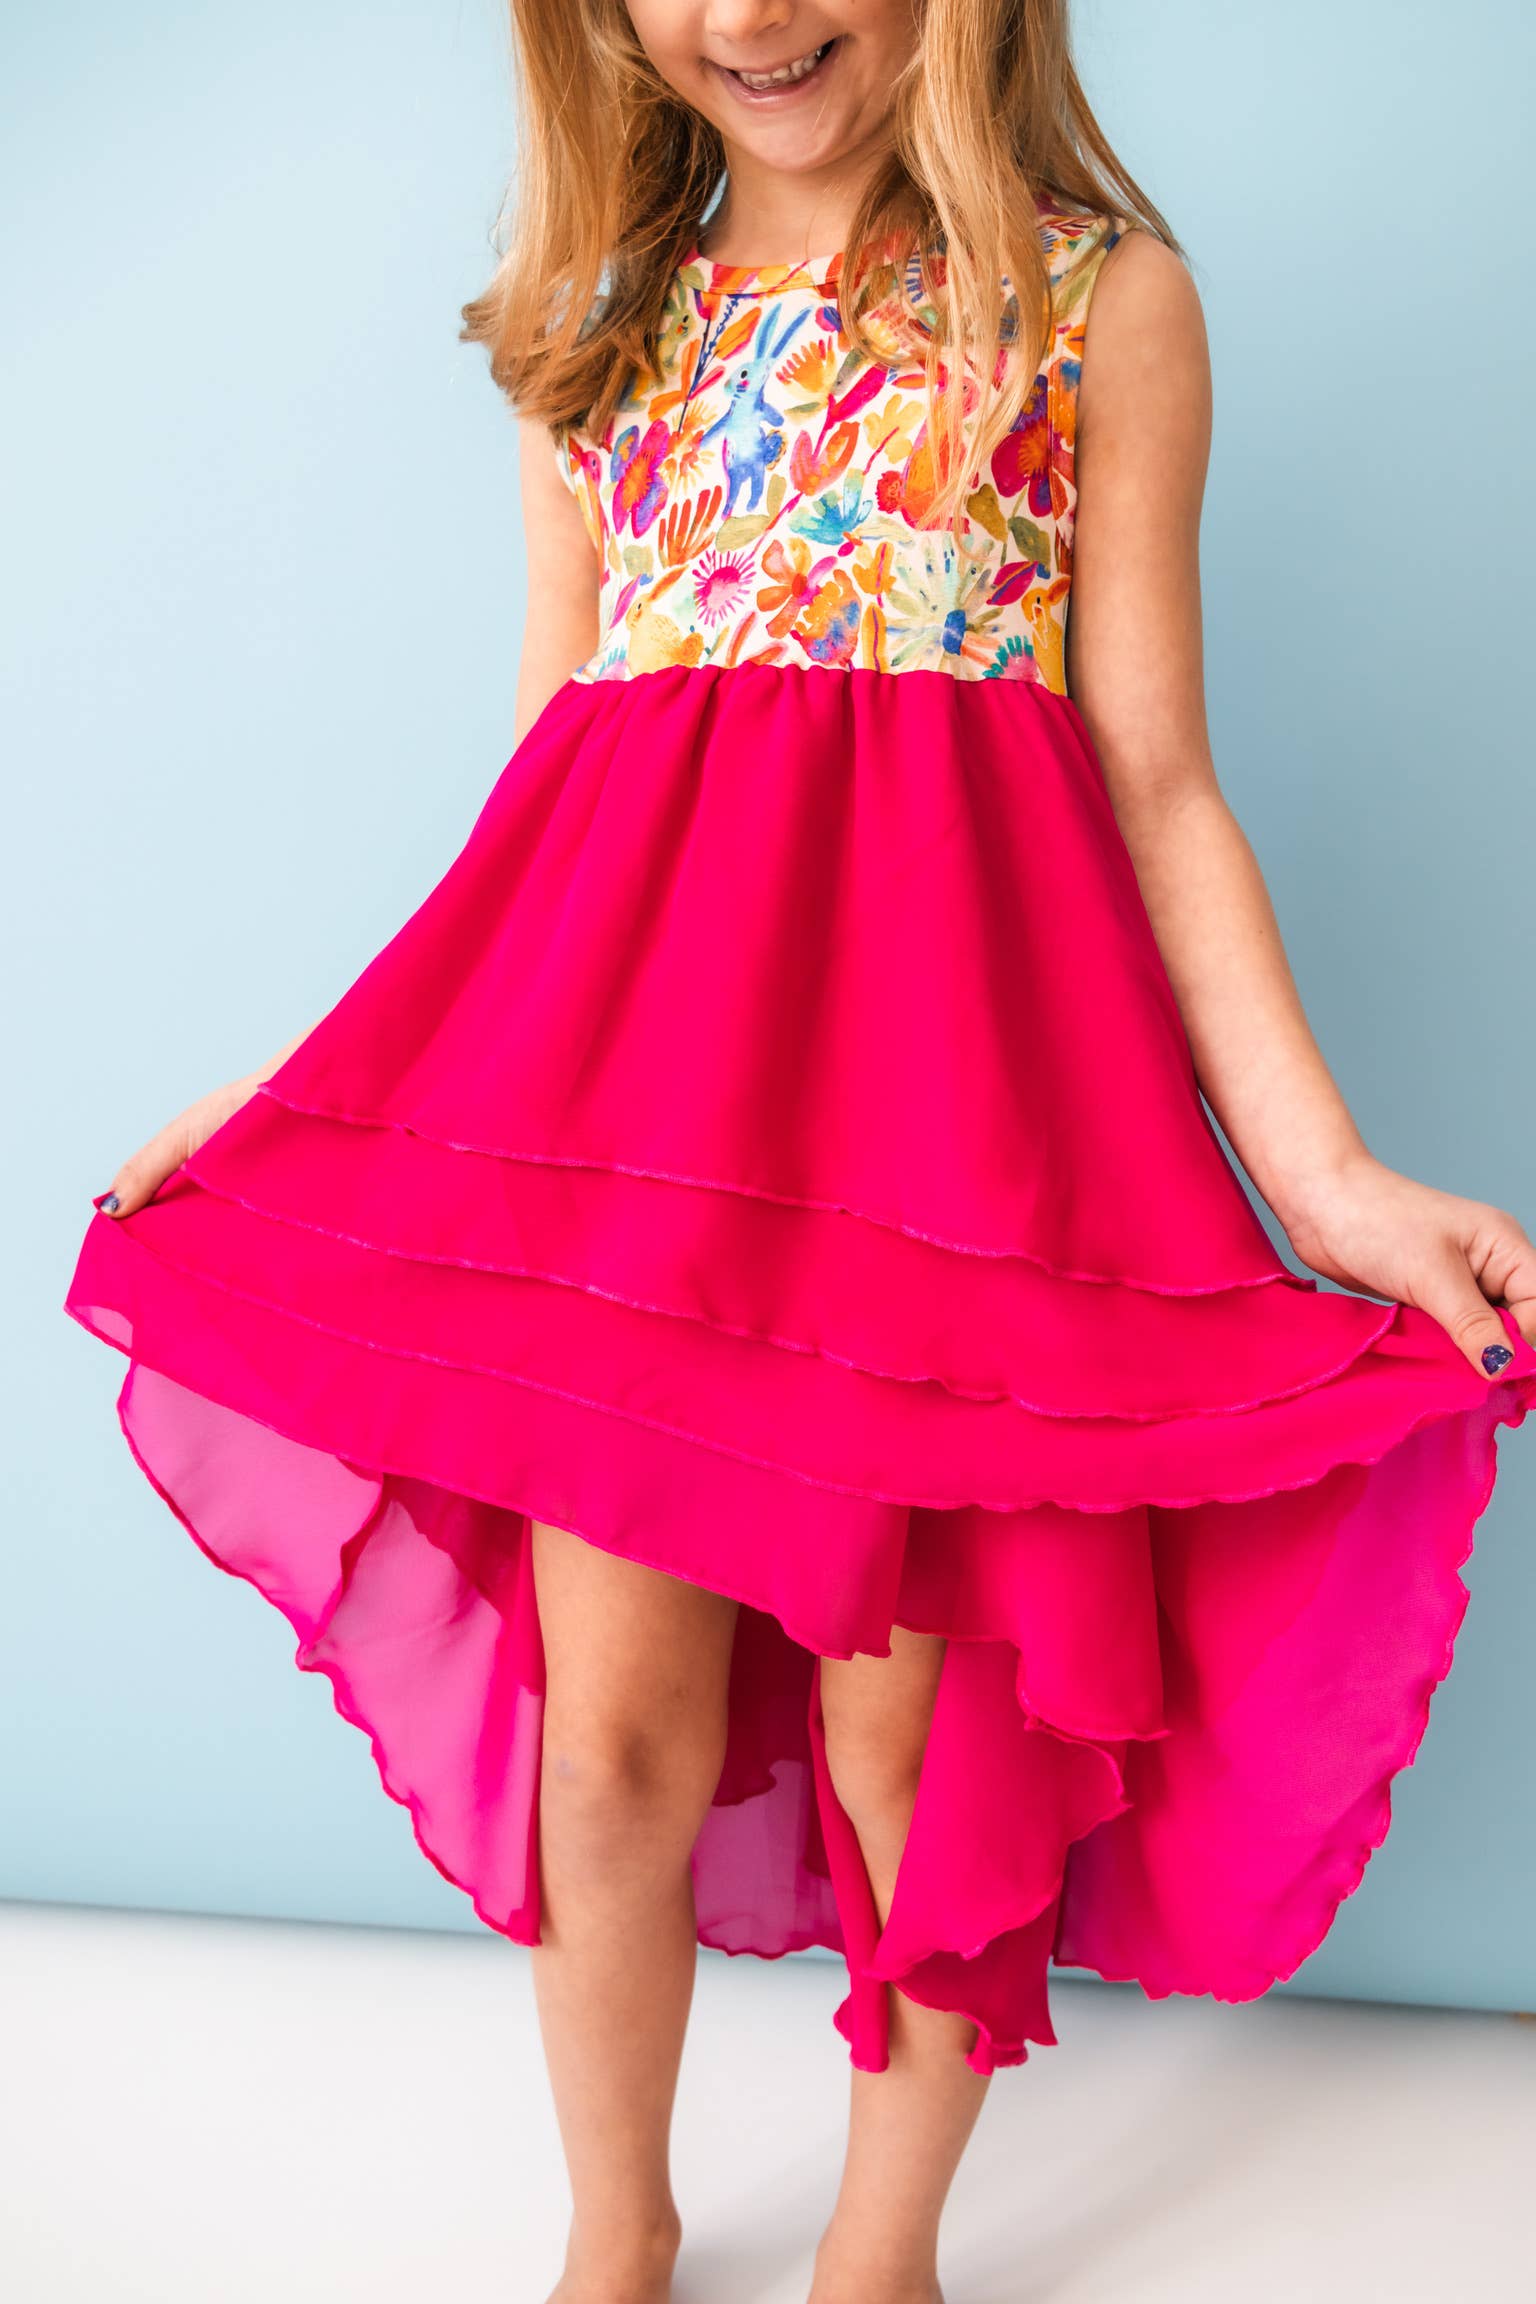 Muse Threads Tiered High-Low Dress - Spring Bunnies